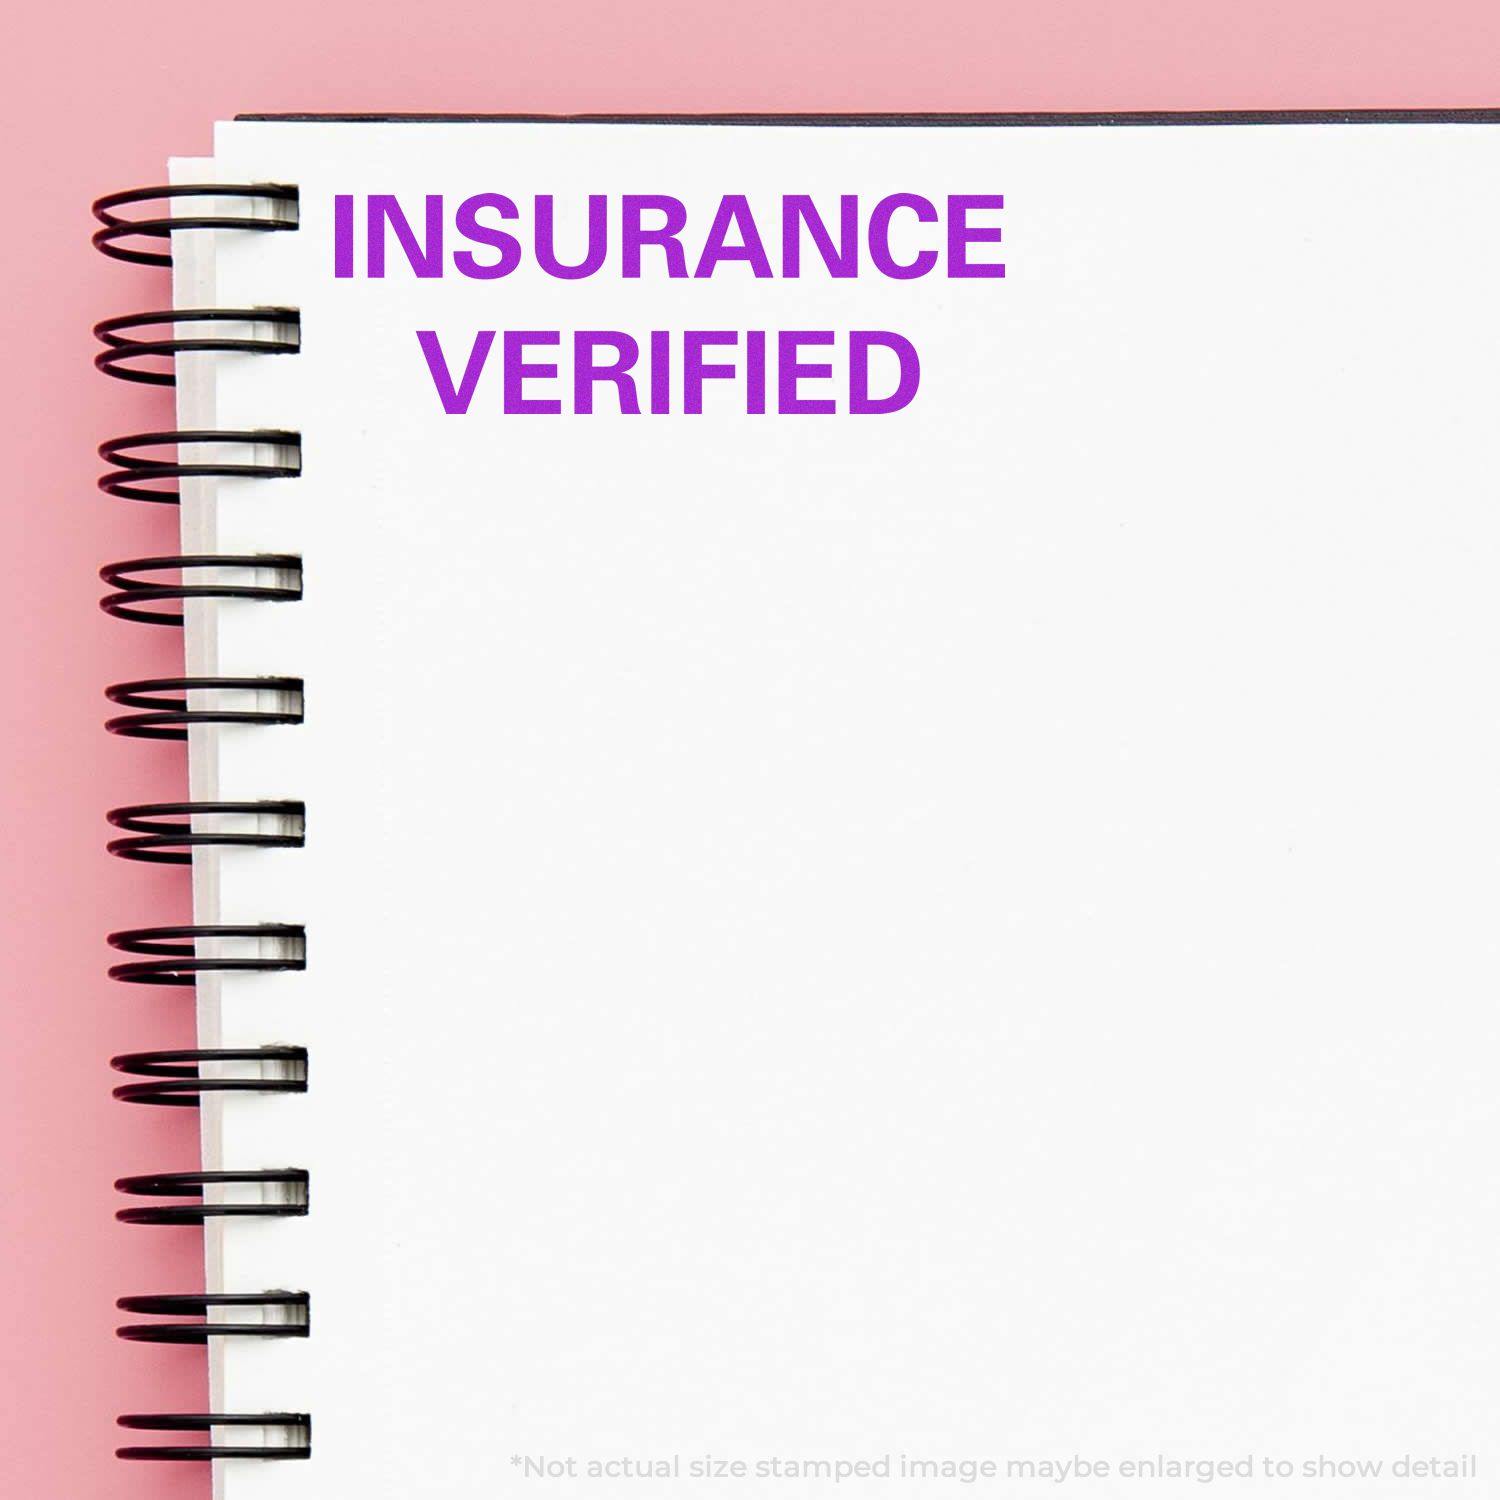 A stock office rubber stamp with a stamped image showing how the text "INSURANCE VERIFIED" in a large font is displayed after stamping.